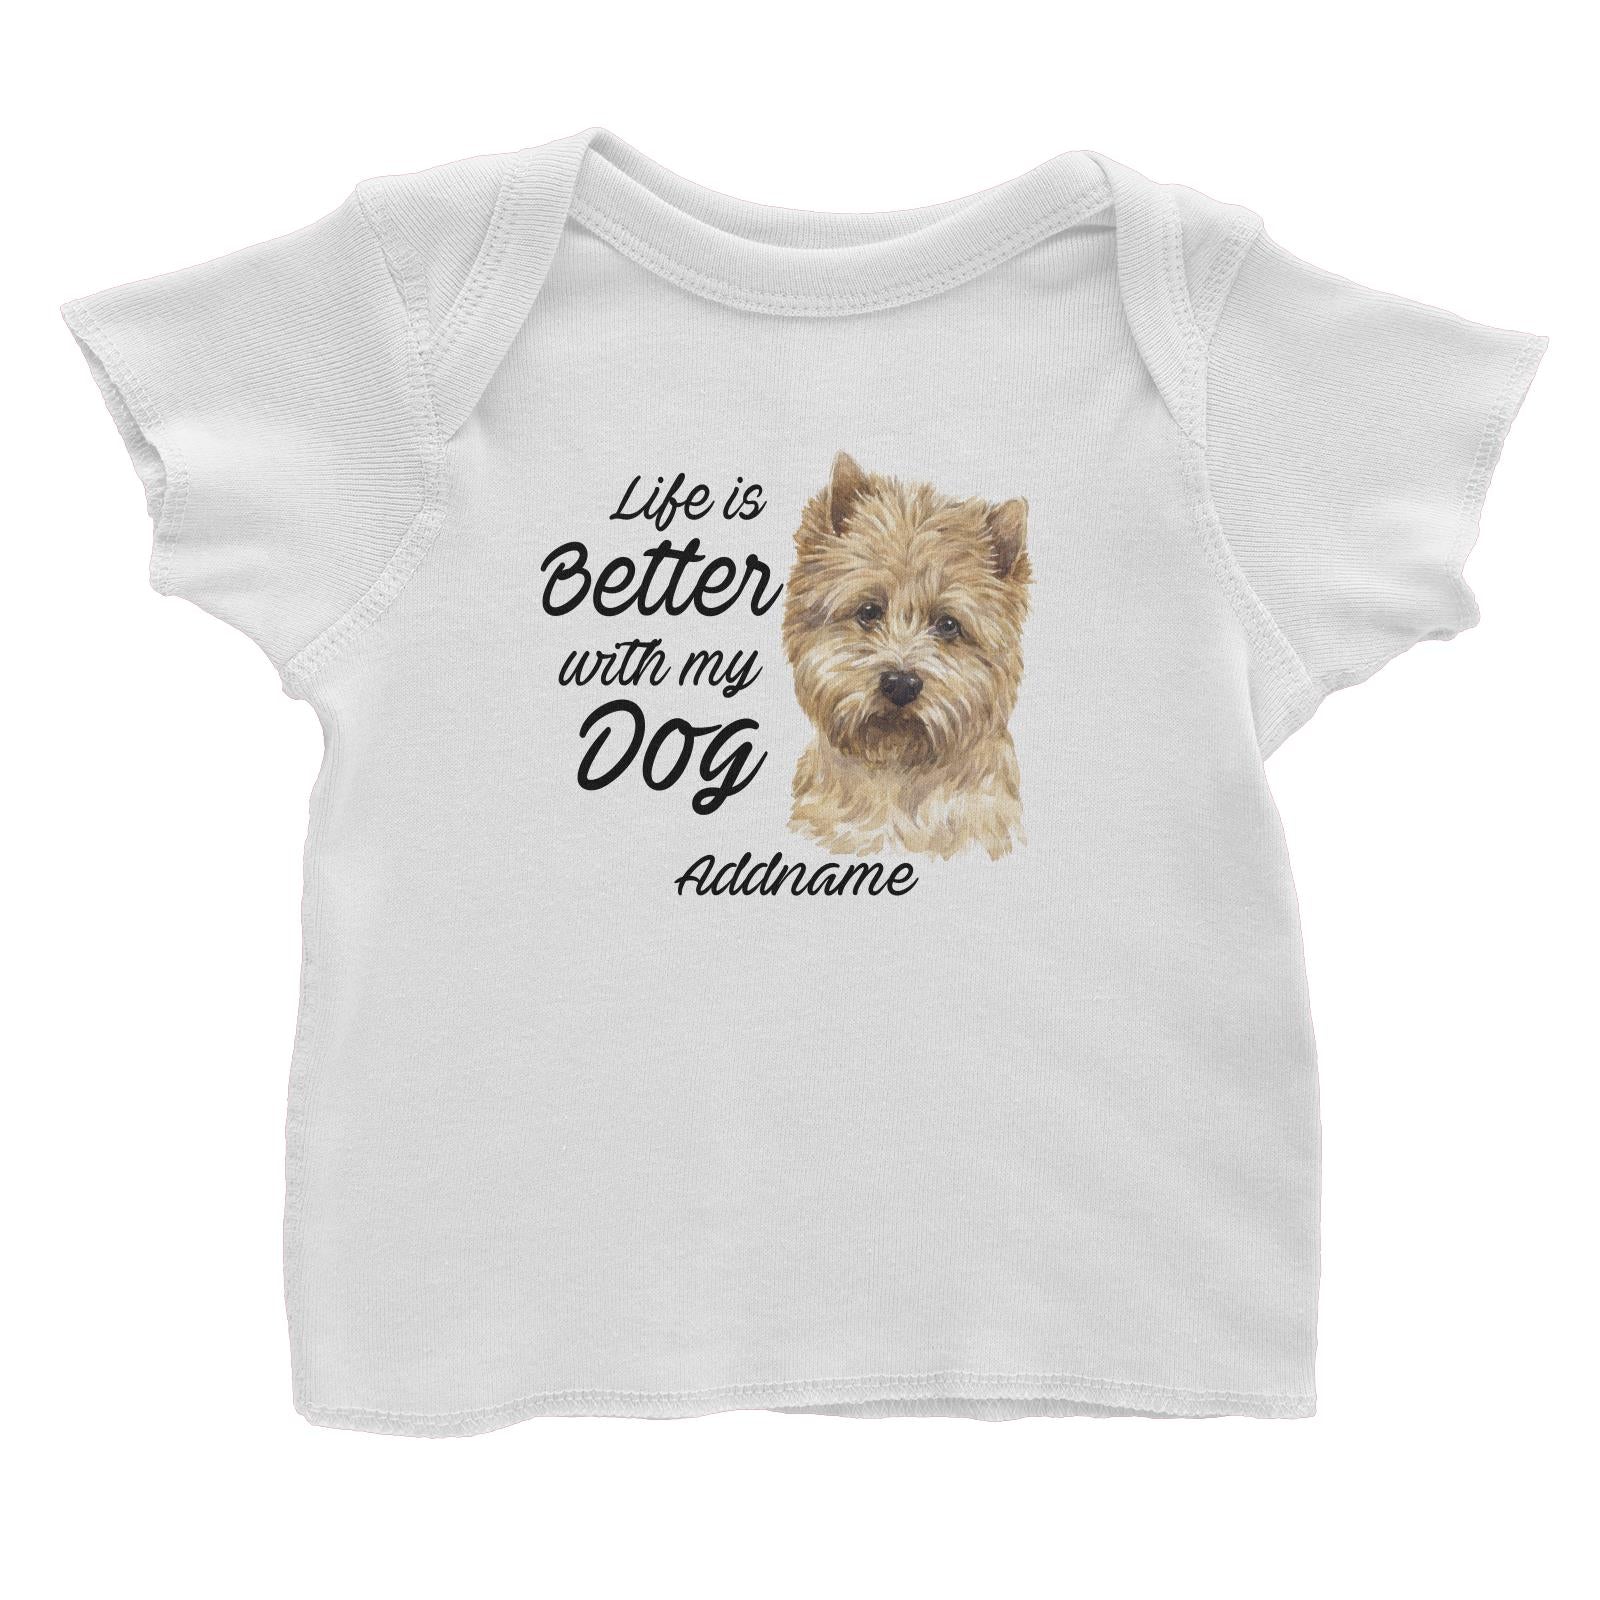 Watercolor Life is Better With My Dog Cairn Terrier Addname Baby T-Shirt